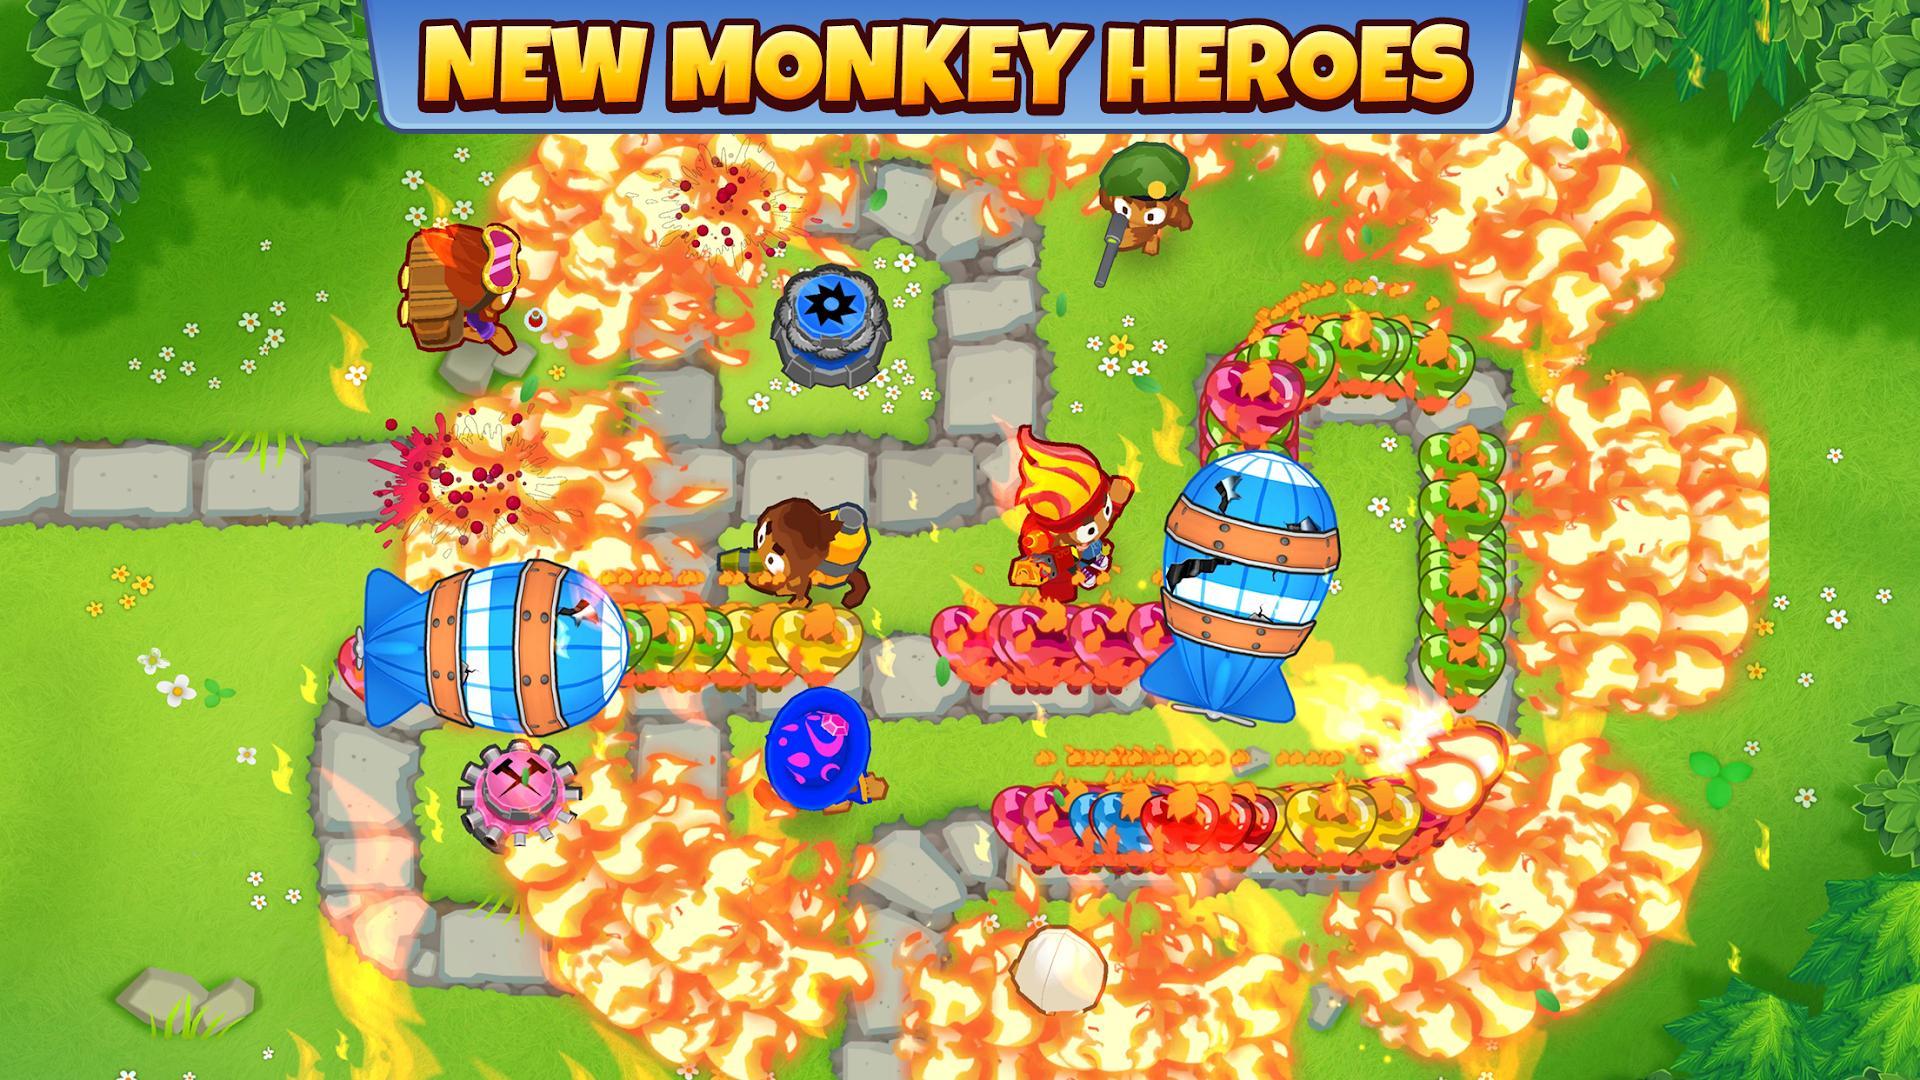 bloons tower defense 3 free download